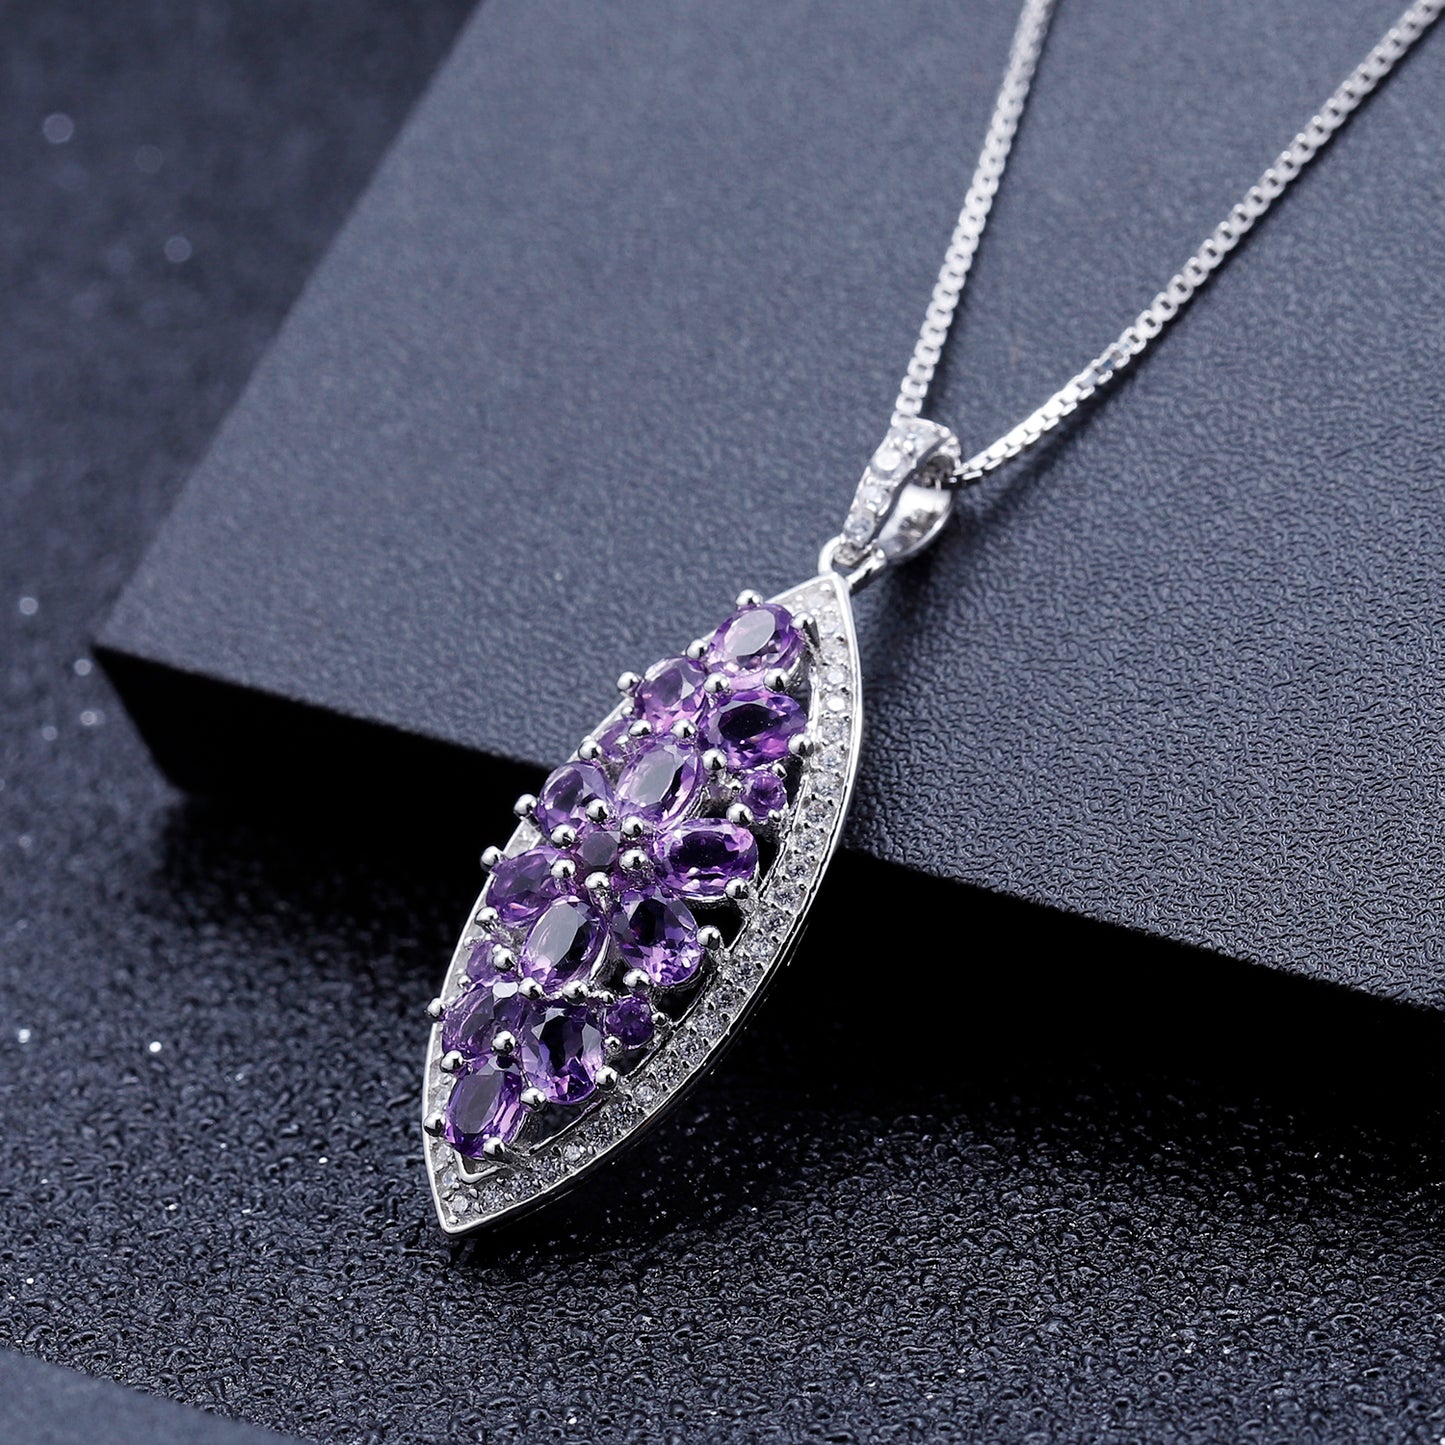 Amethyst Twilight Necklace in Sterling Silver